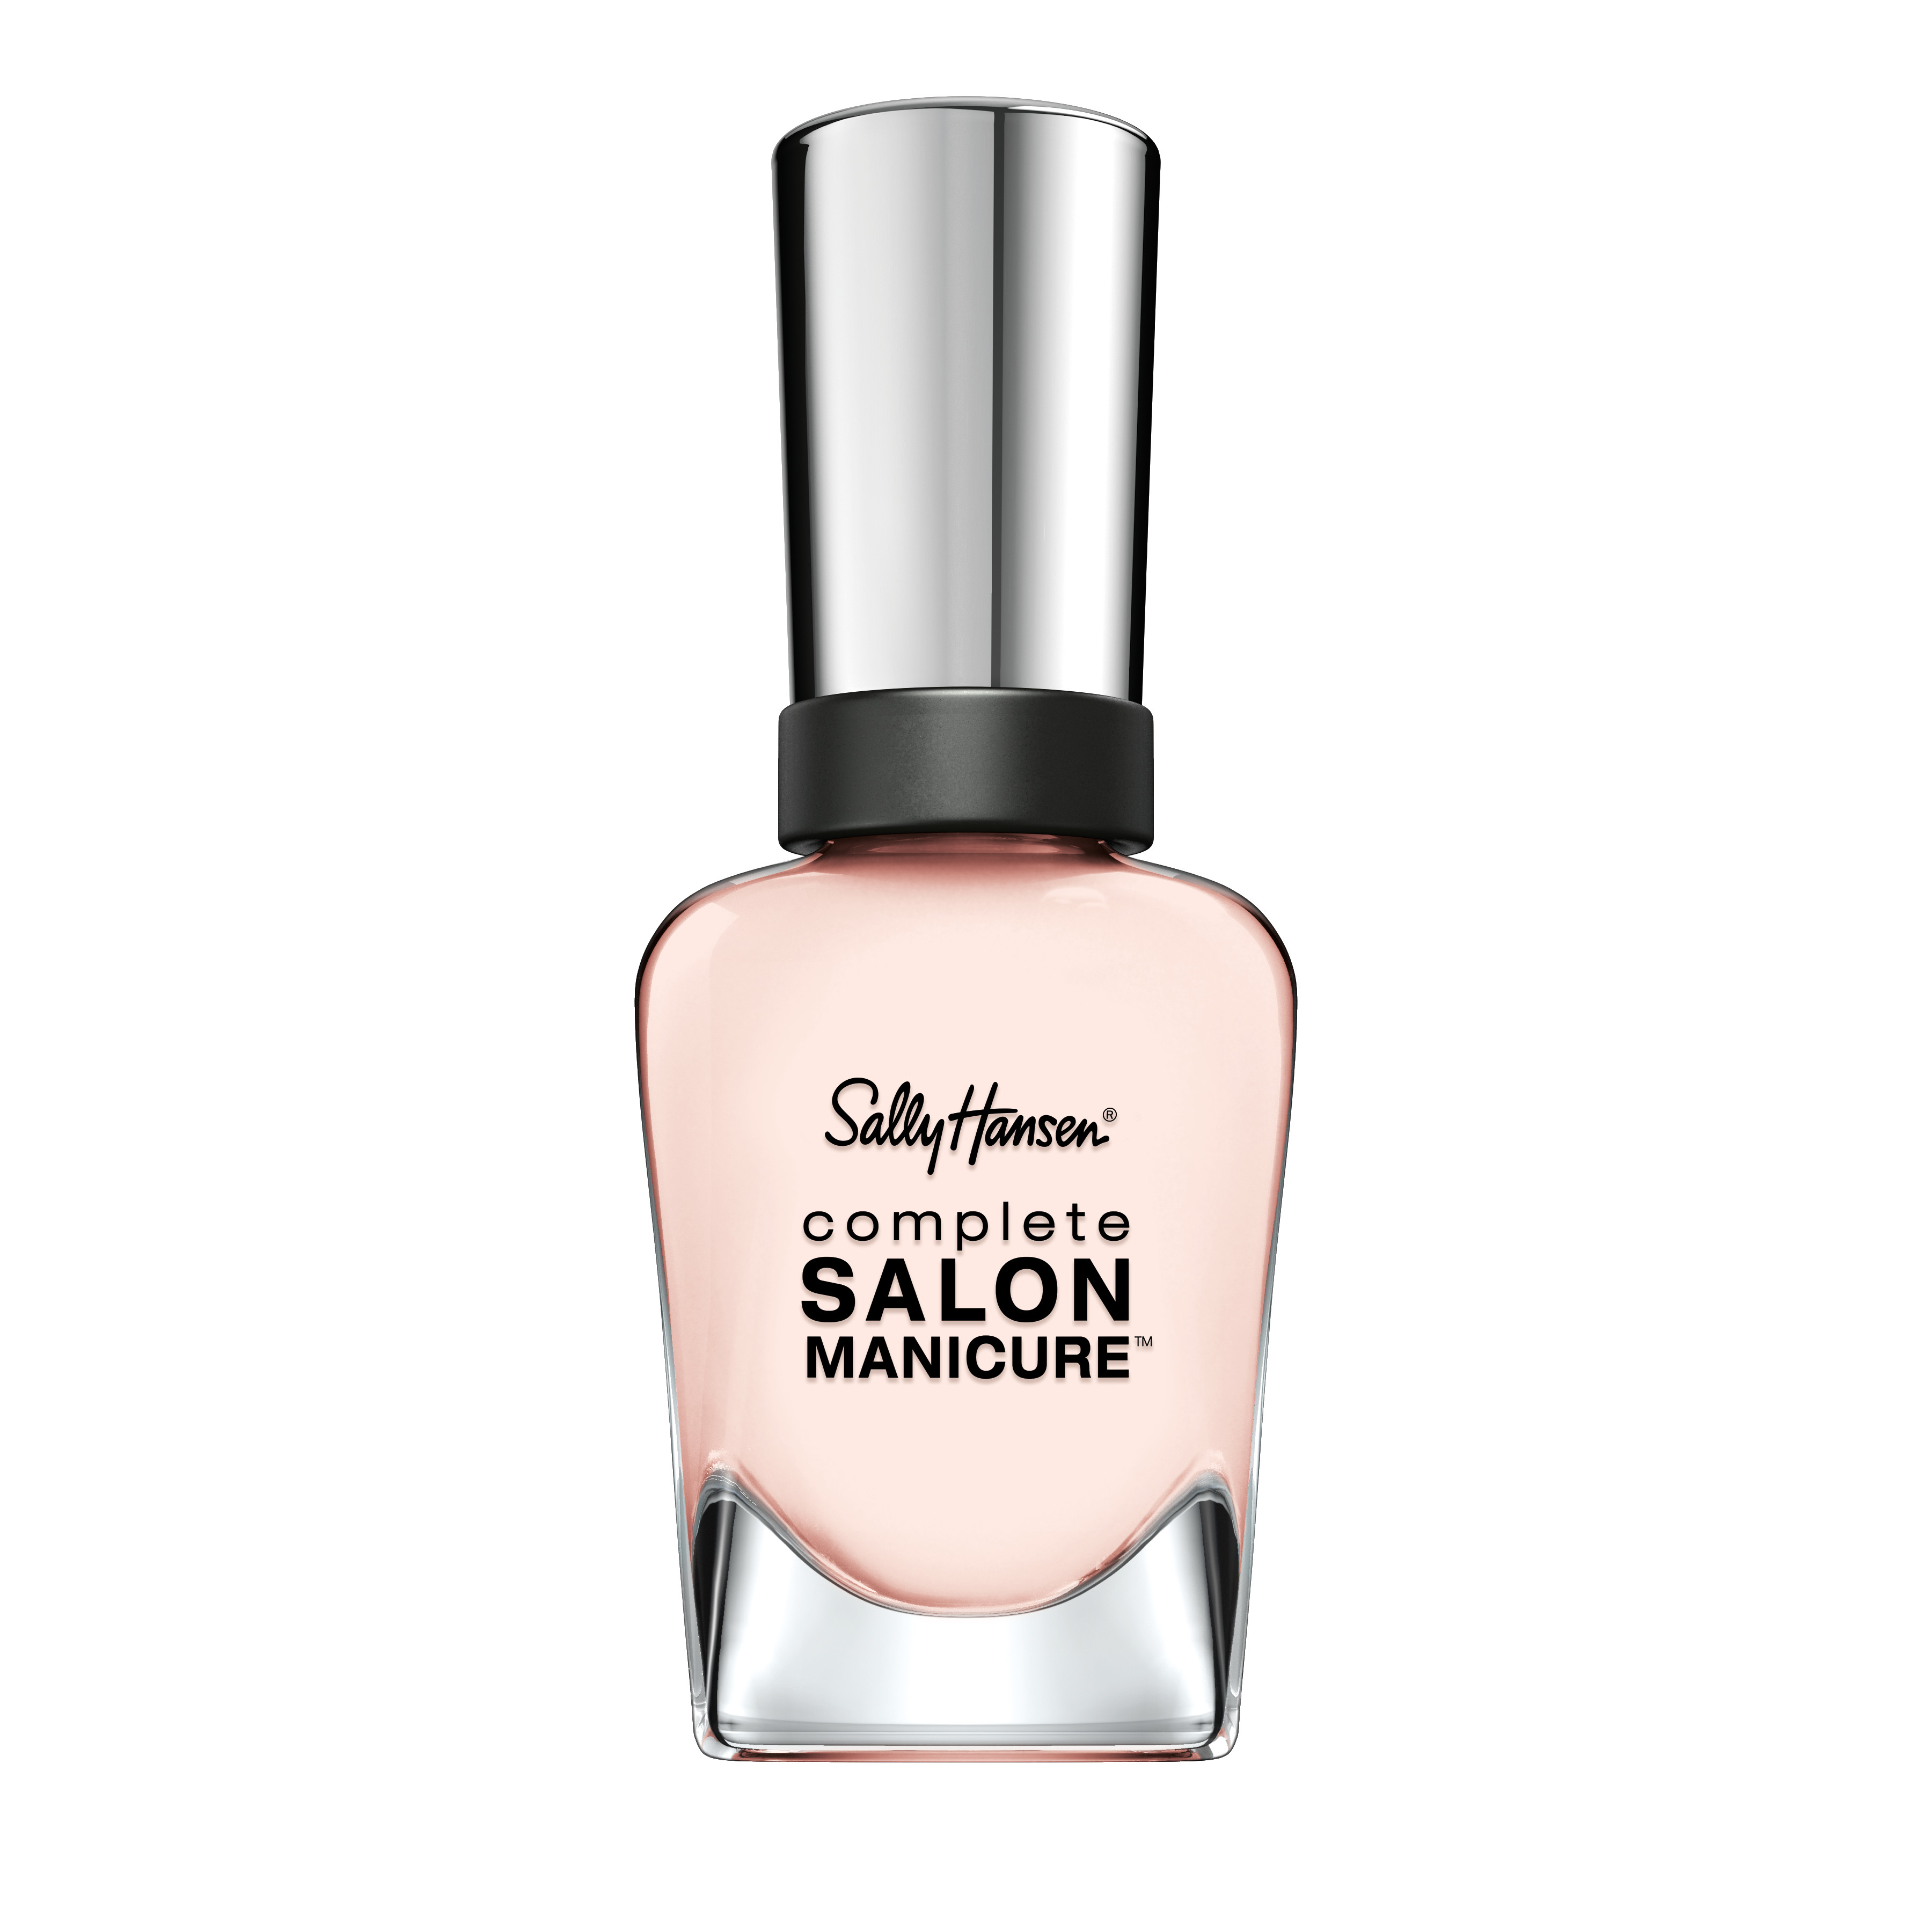 Sally Hansen Complete Salon Manicure Nail Color, Shell We Dance? - image 1 of 3